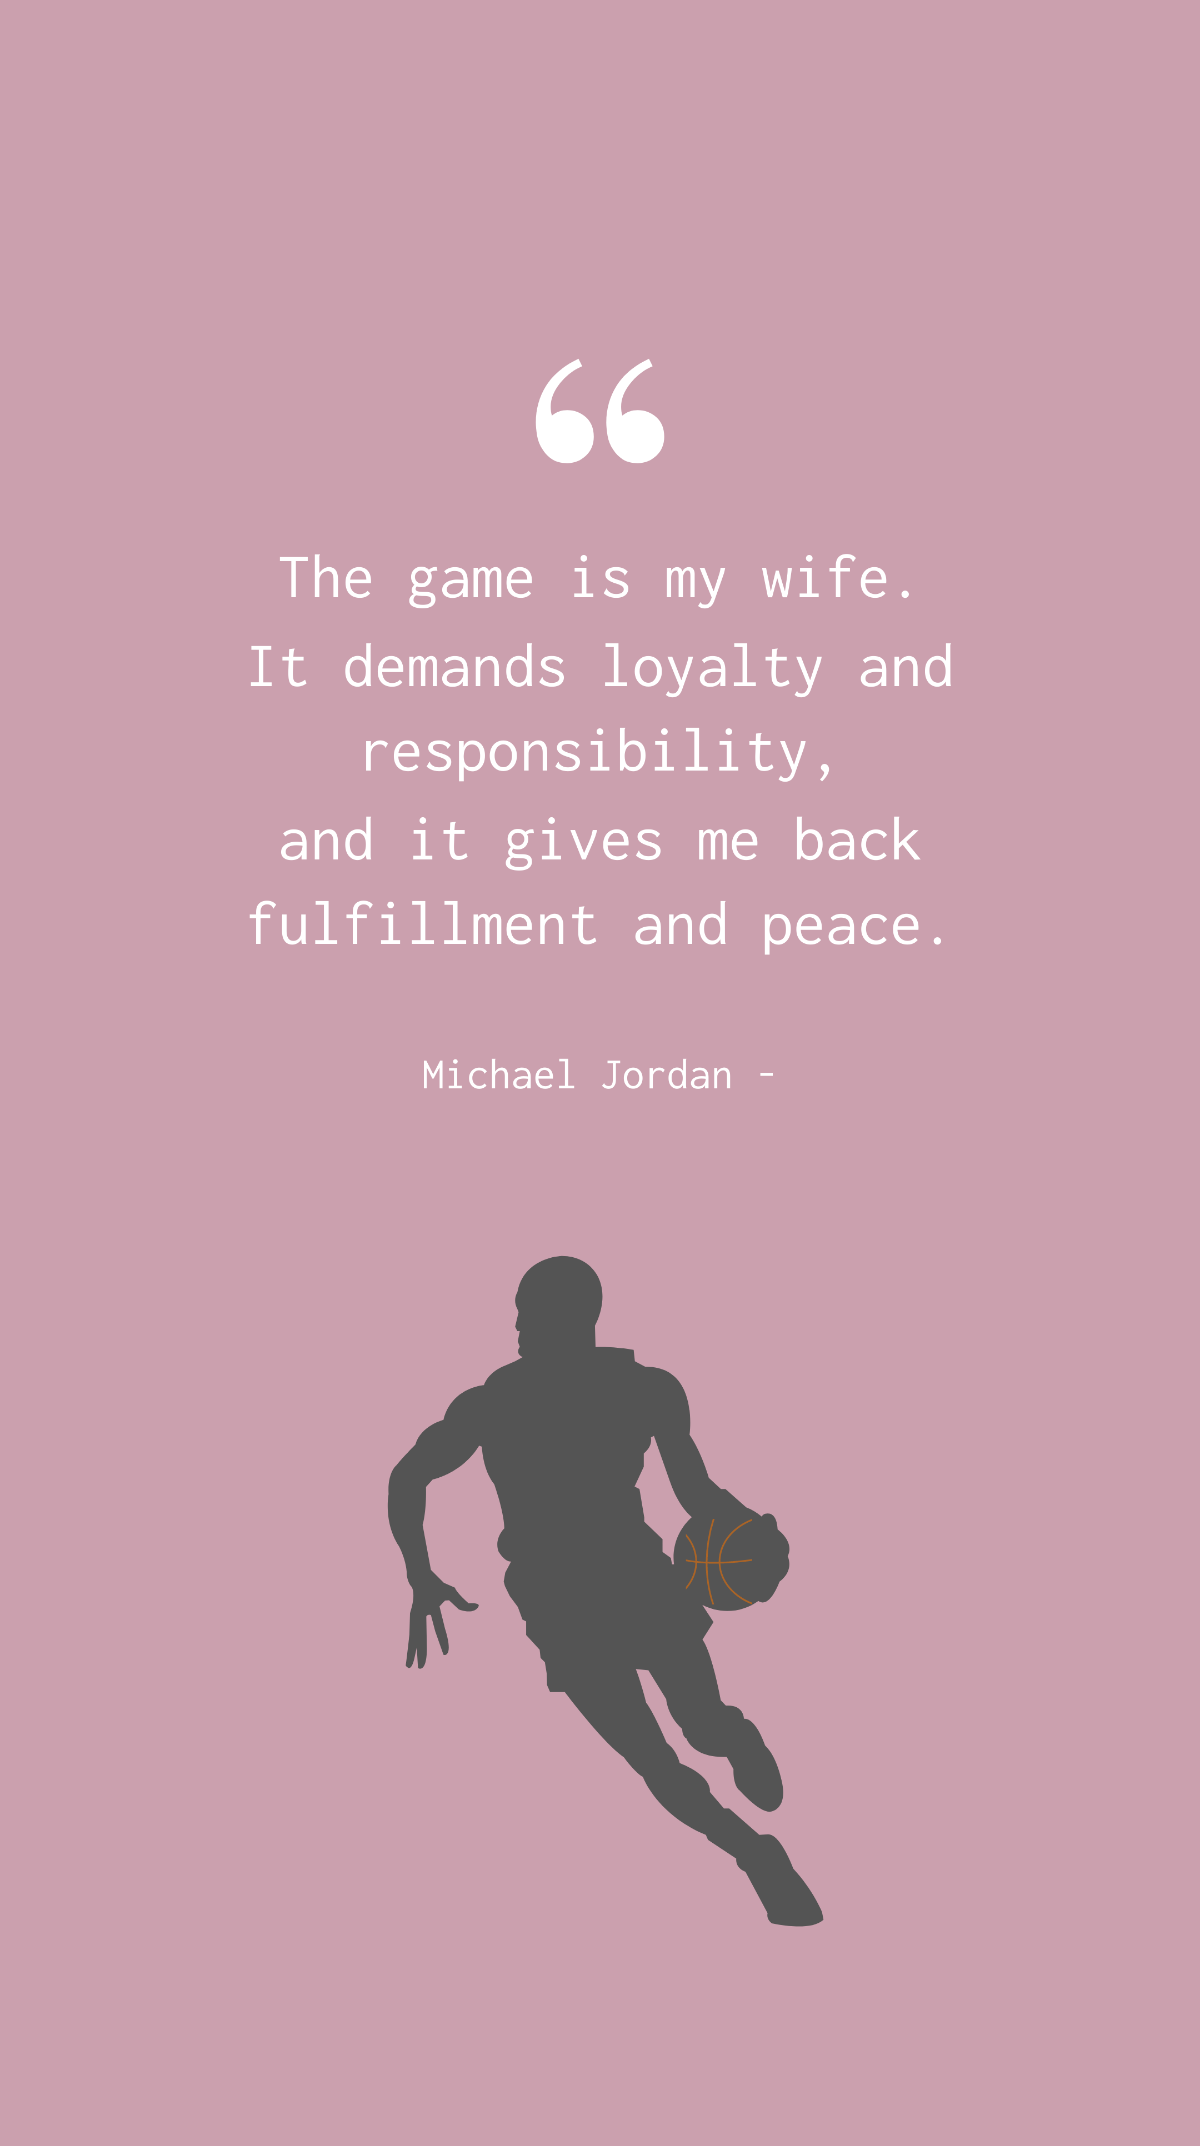 Free Michael Jordan - The game is my wife. It demands loyalty and responsibility, and it gives me back fulfillment and peace. Template